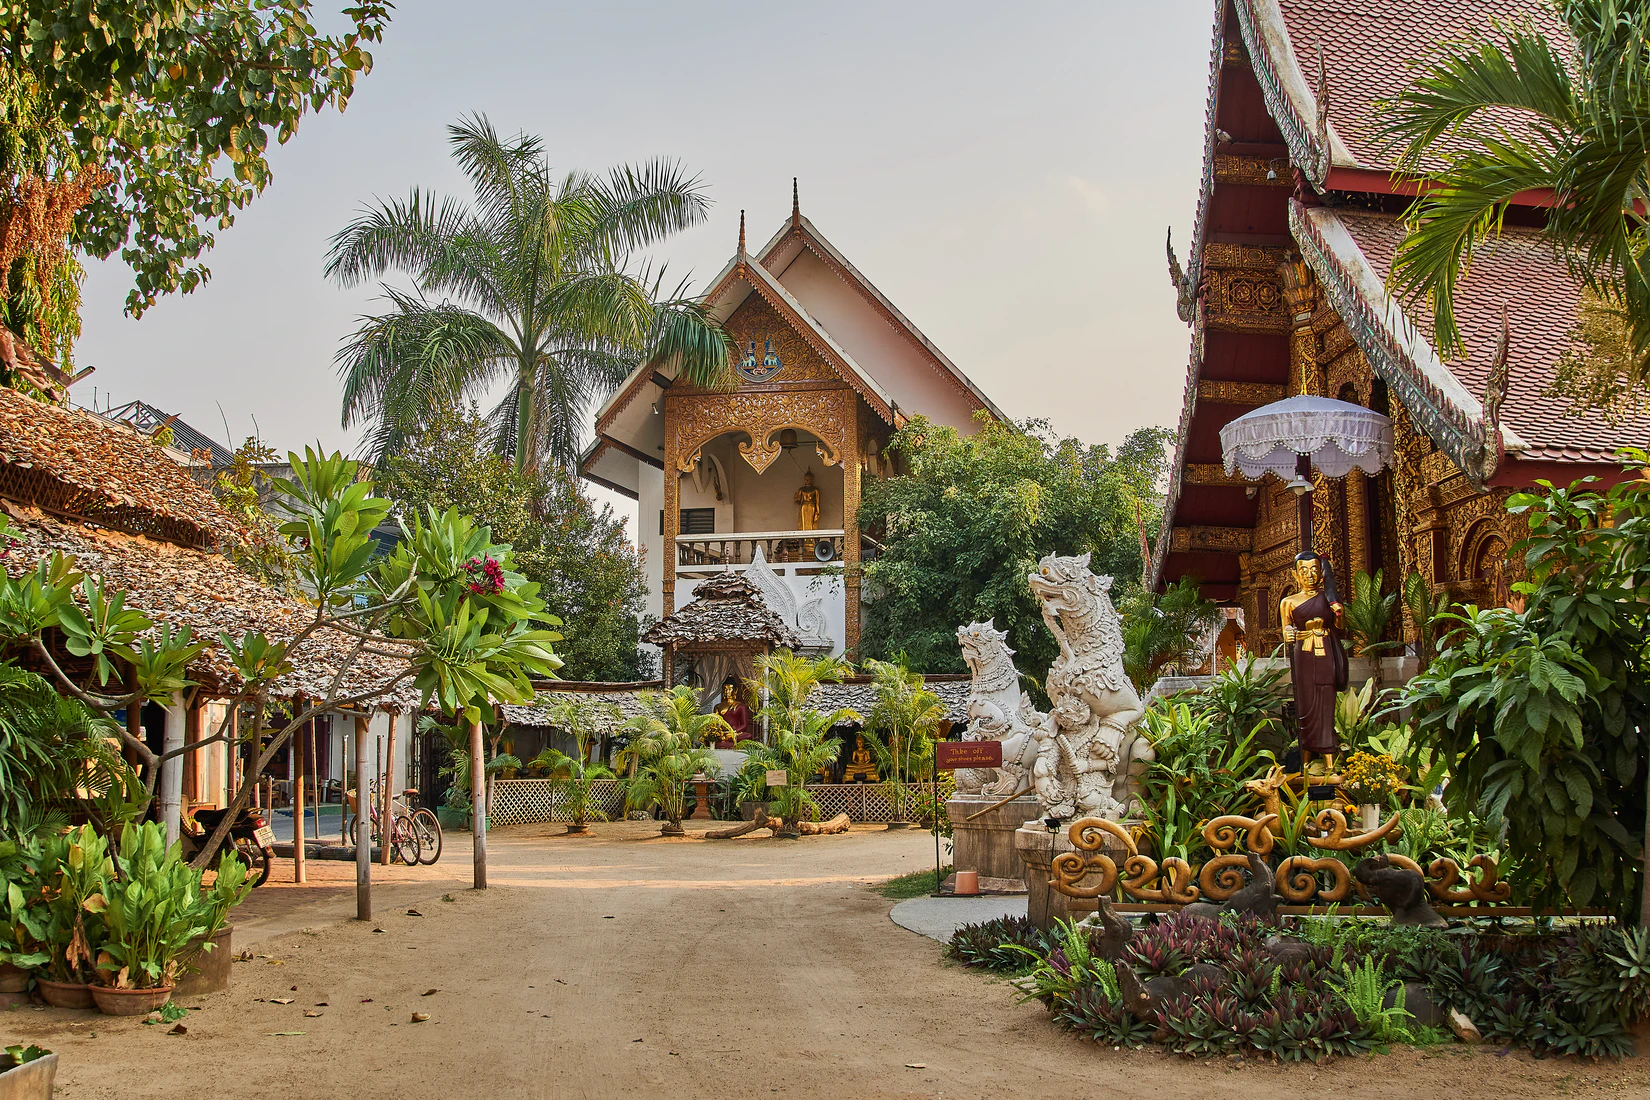 Temples in Chiang Mai, Thailand with two story buildings, dragons and palm trees with green foliage